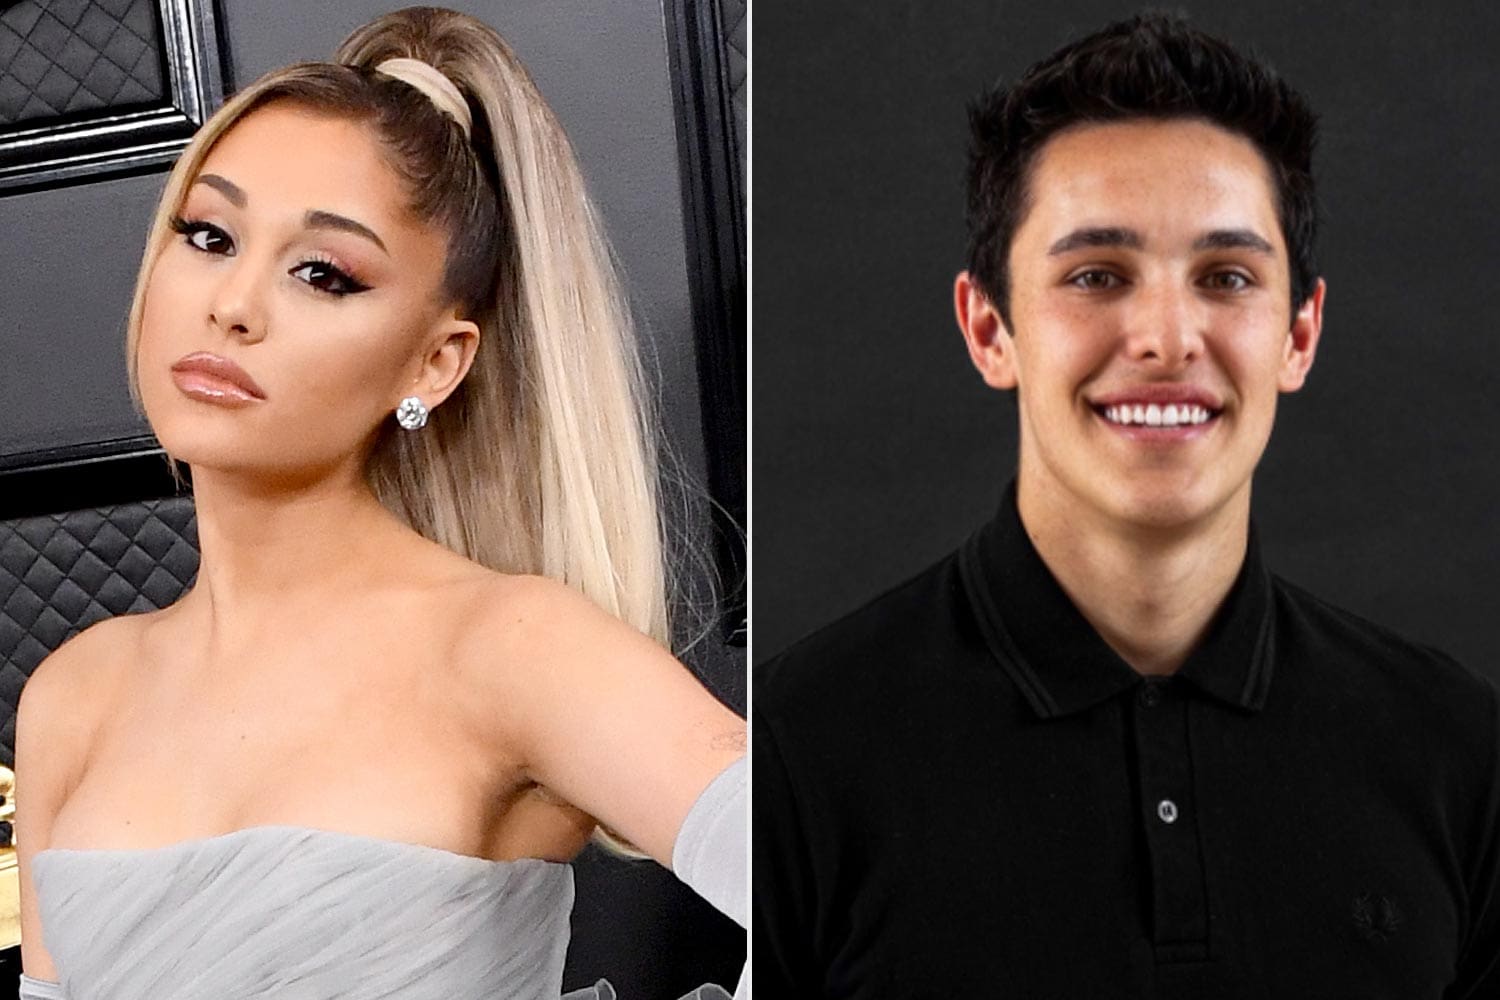 ariana-grande-posts-some-adorable-pics-and-vids-from-her-and-new-hubby-dalton-gomezs-honeymoon